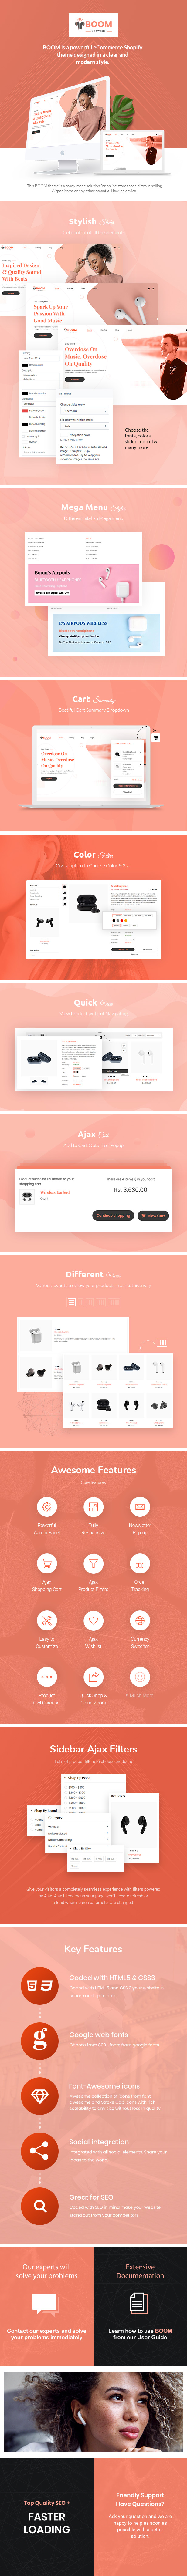 Boom - One Product Electronics Shopify Theme - 7